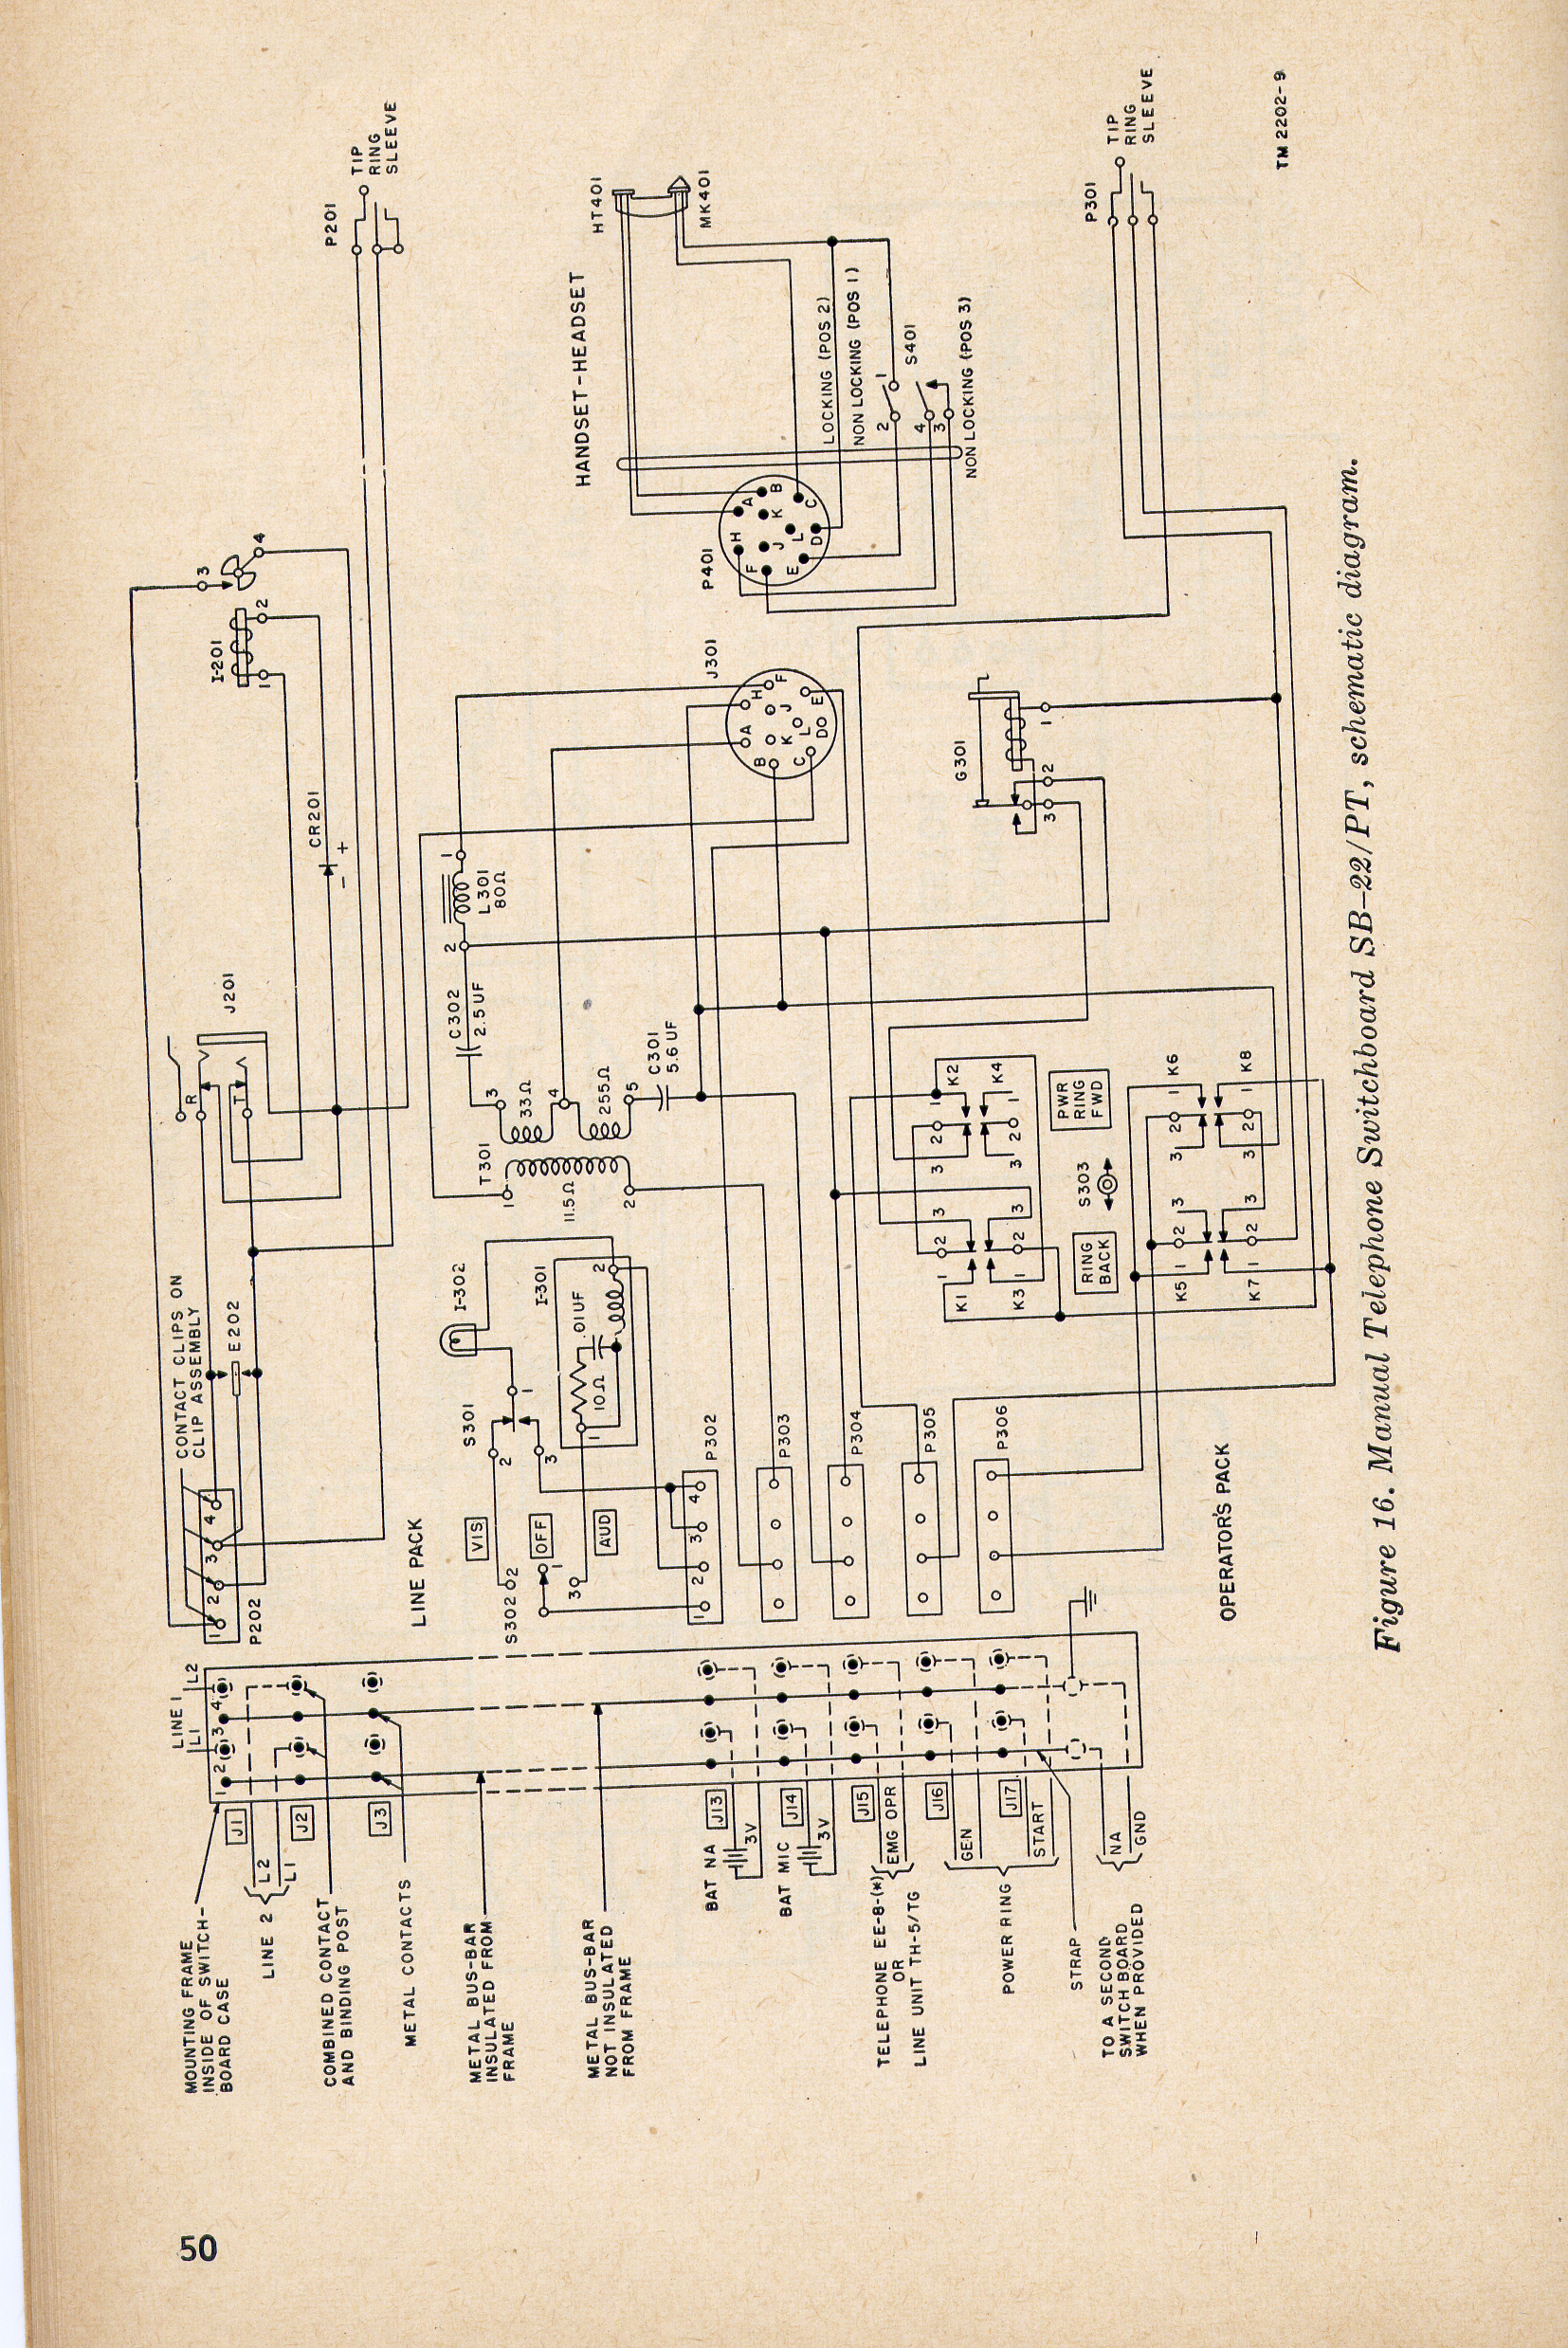 Electrical Diagram View G25A/PT  Magneto Generator